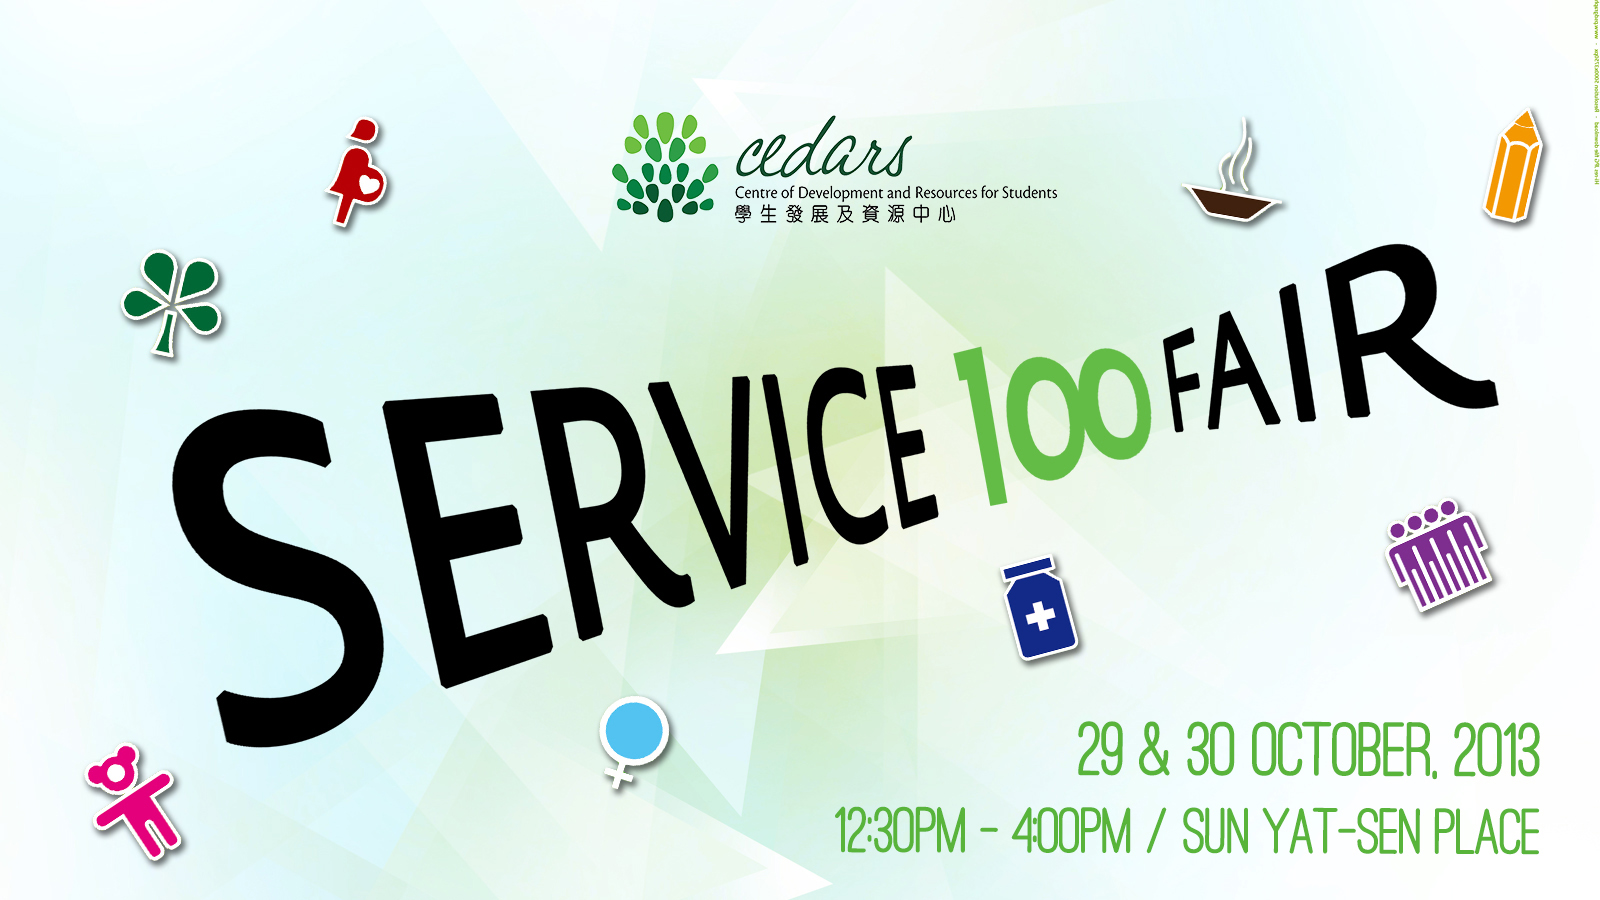 SERVICE 100 Fair on 29 and 30 October